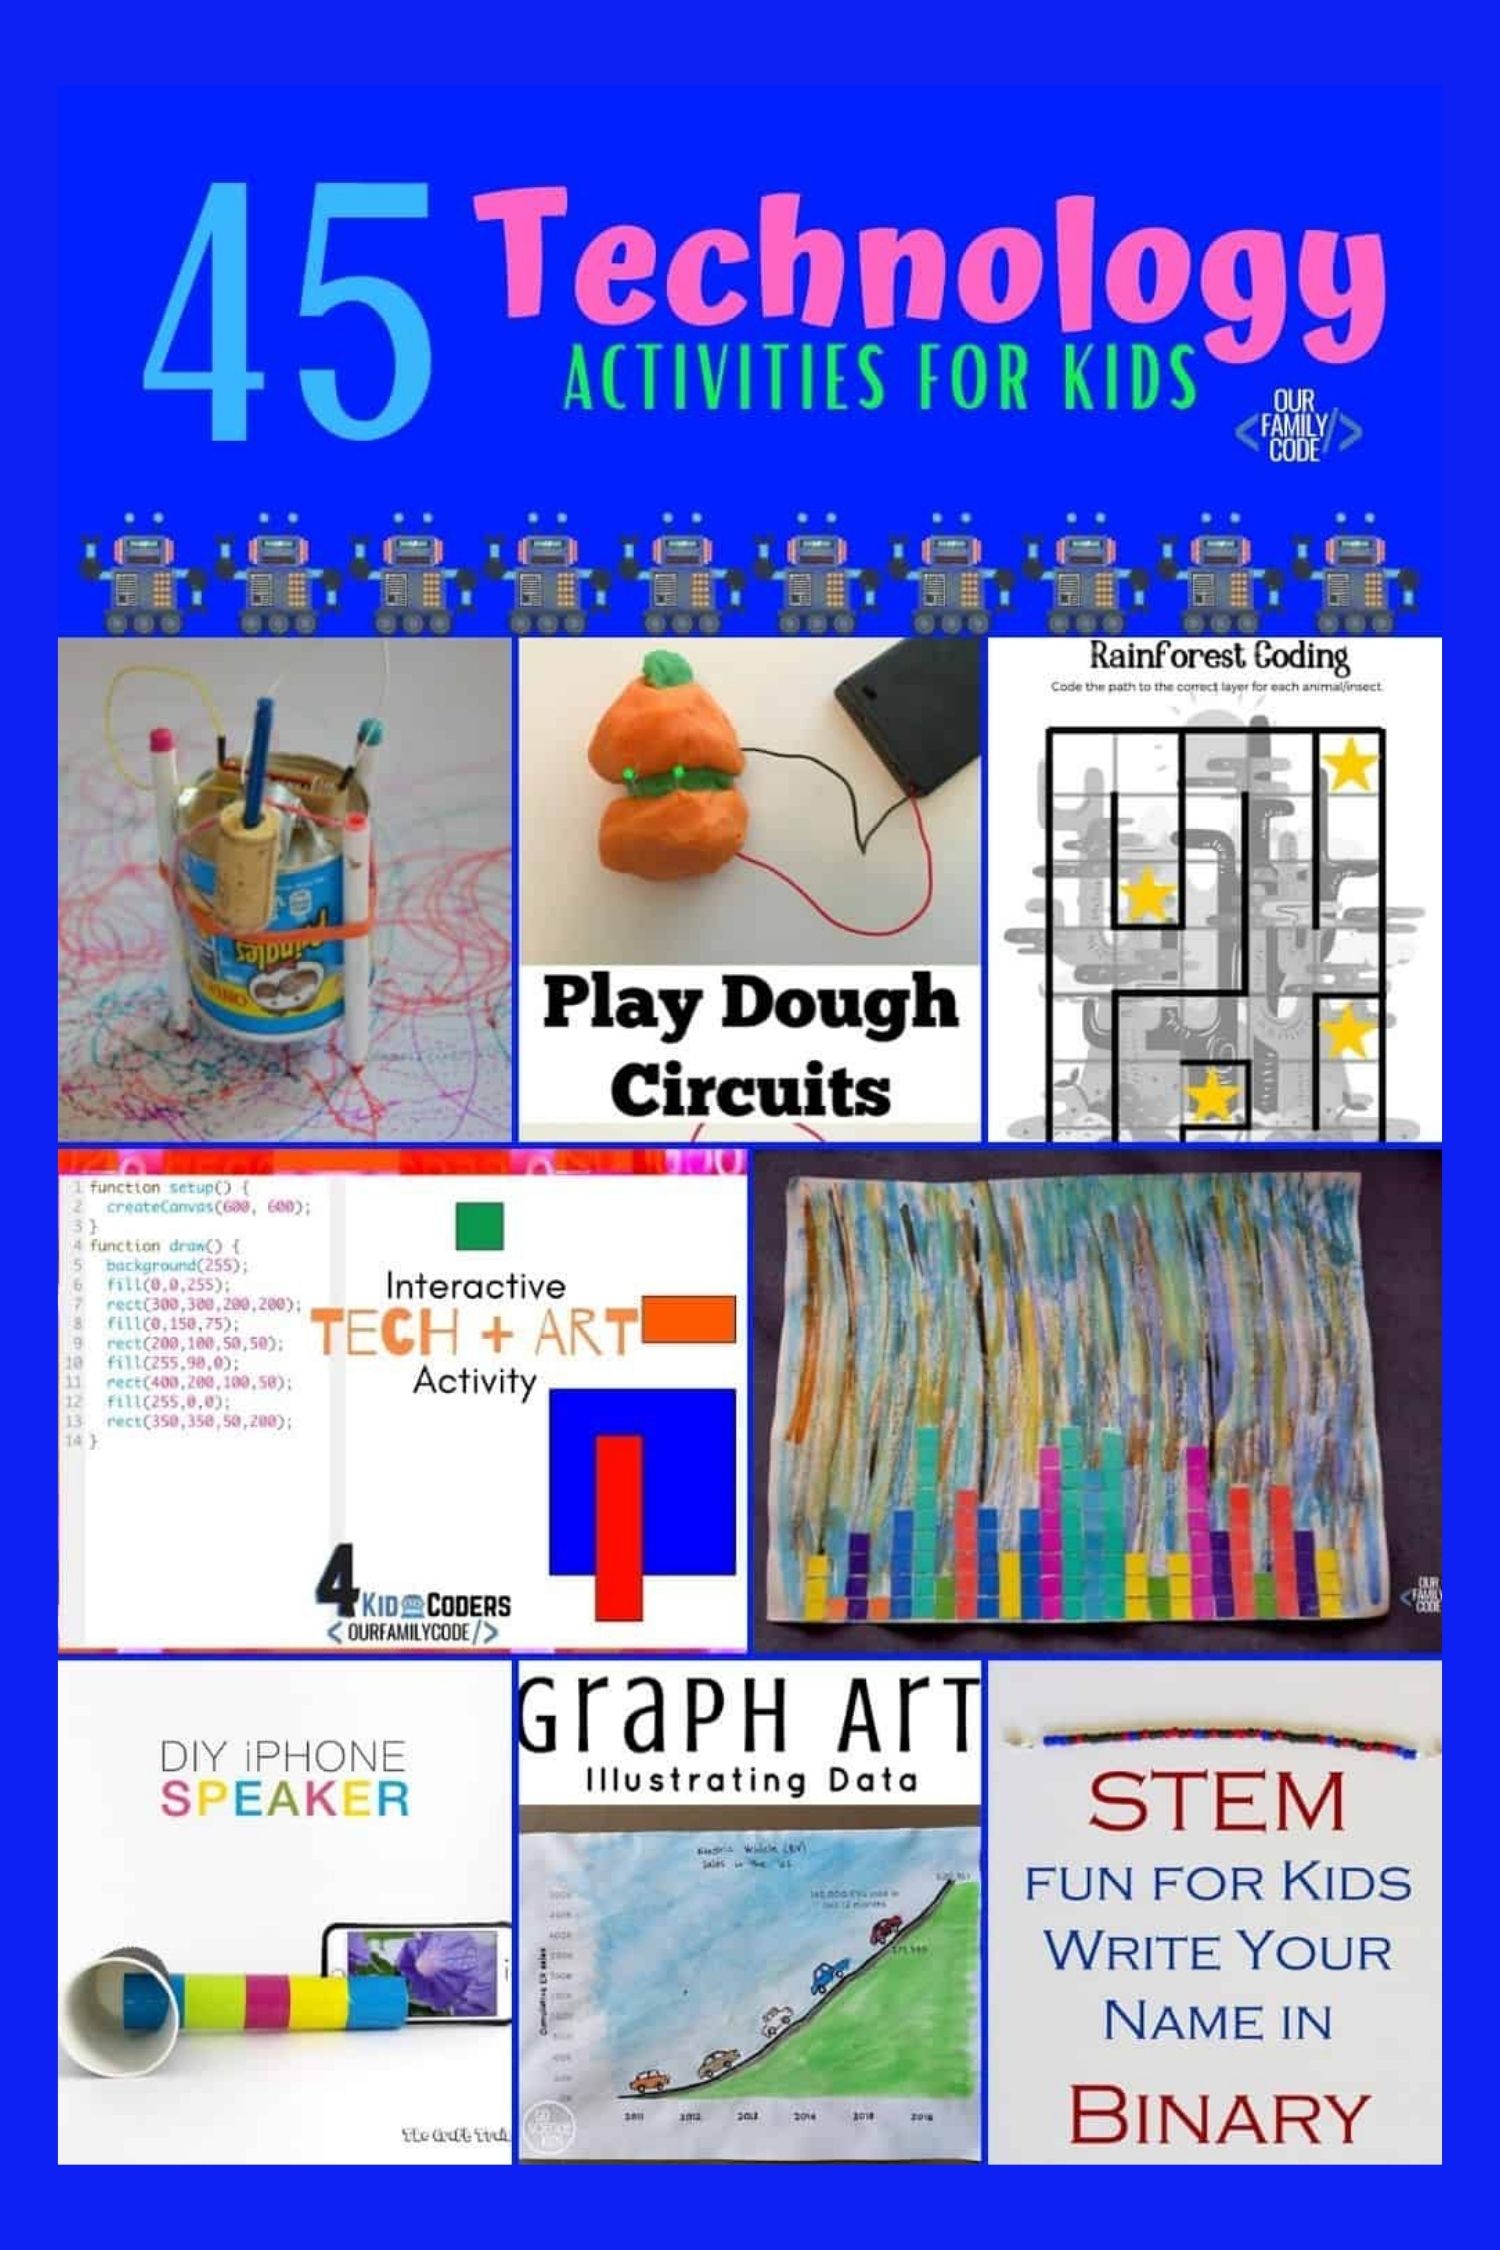 45 technology activities for kids collage 3